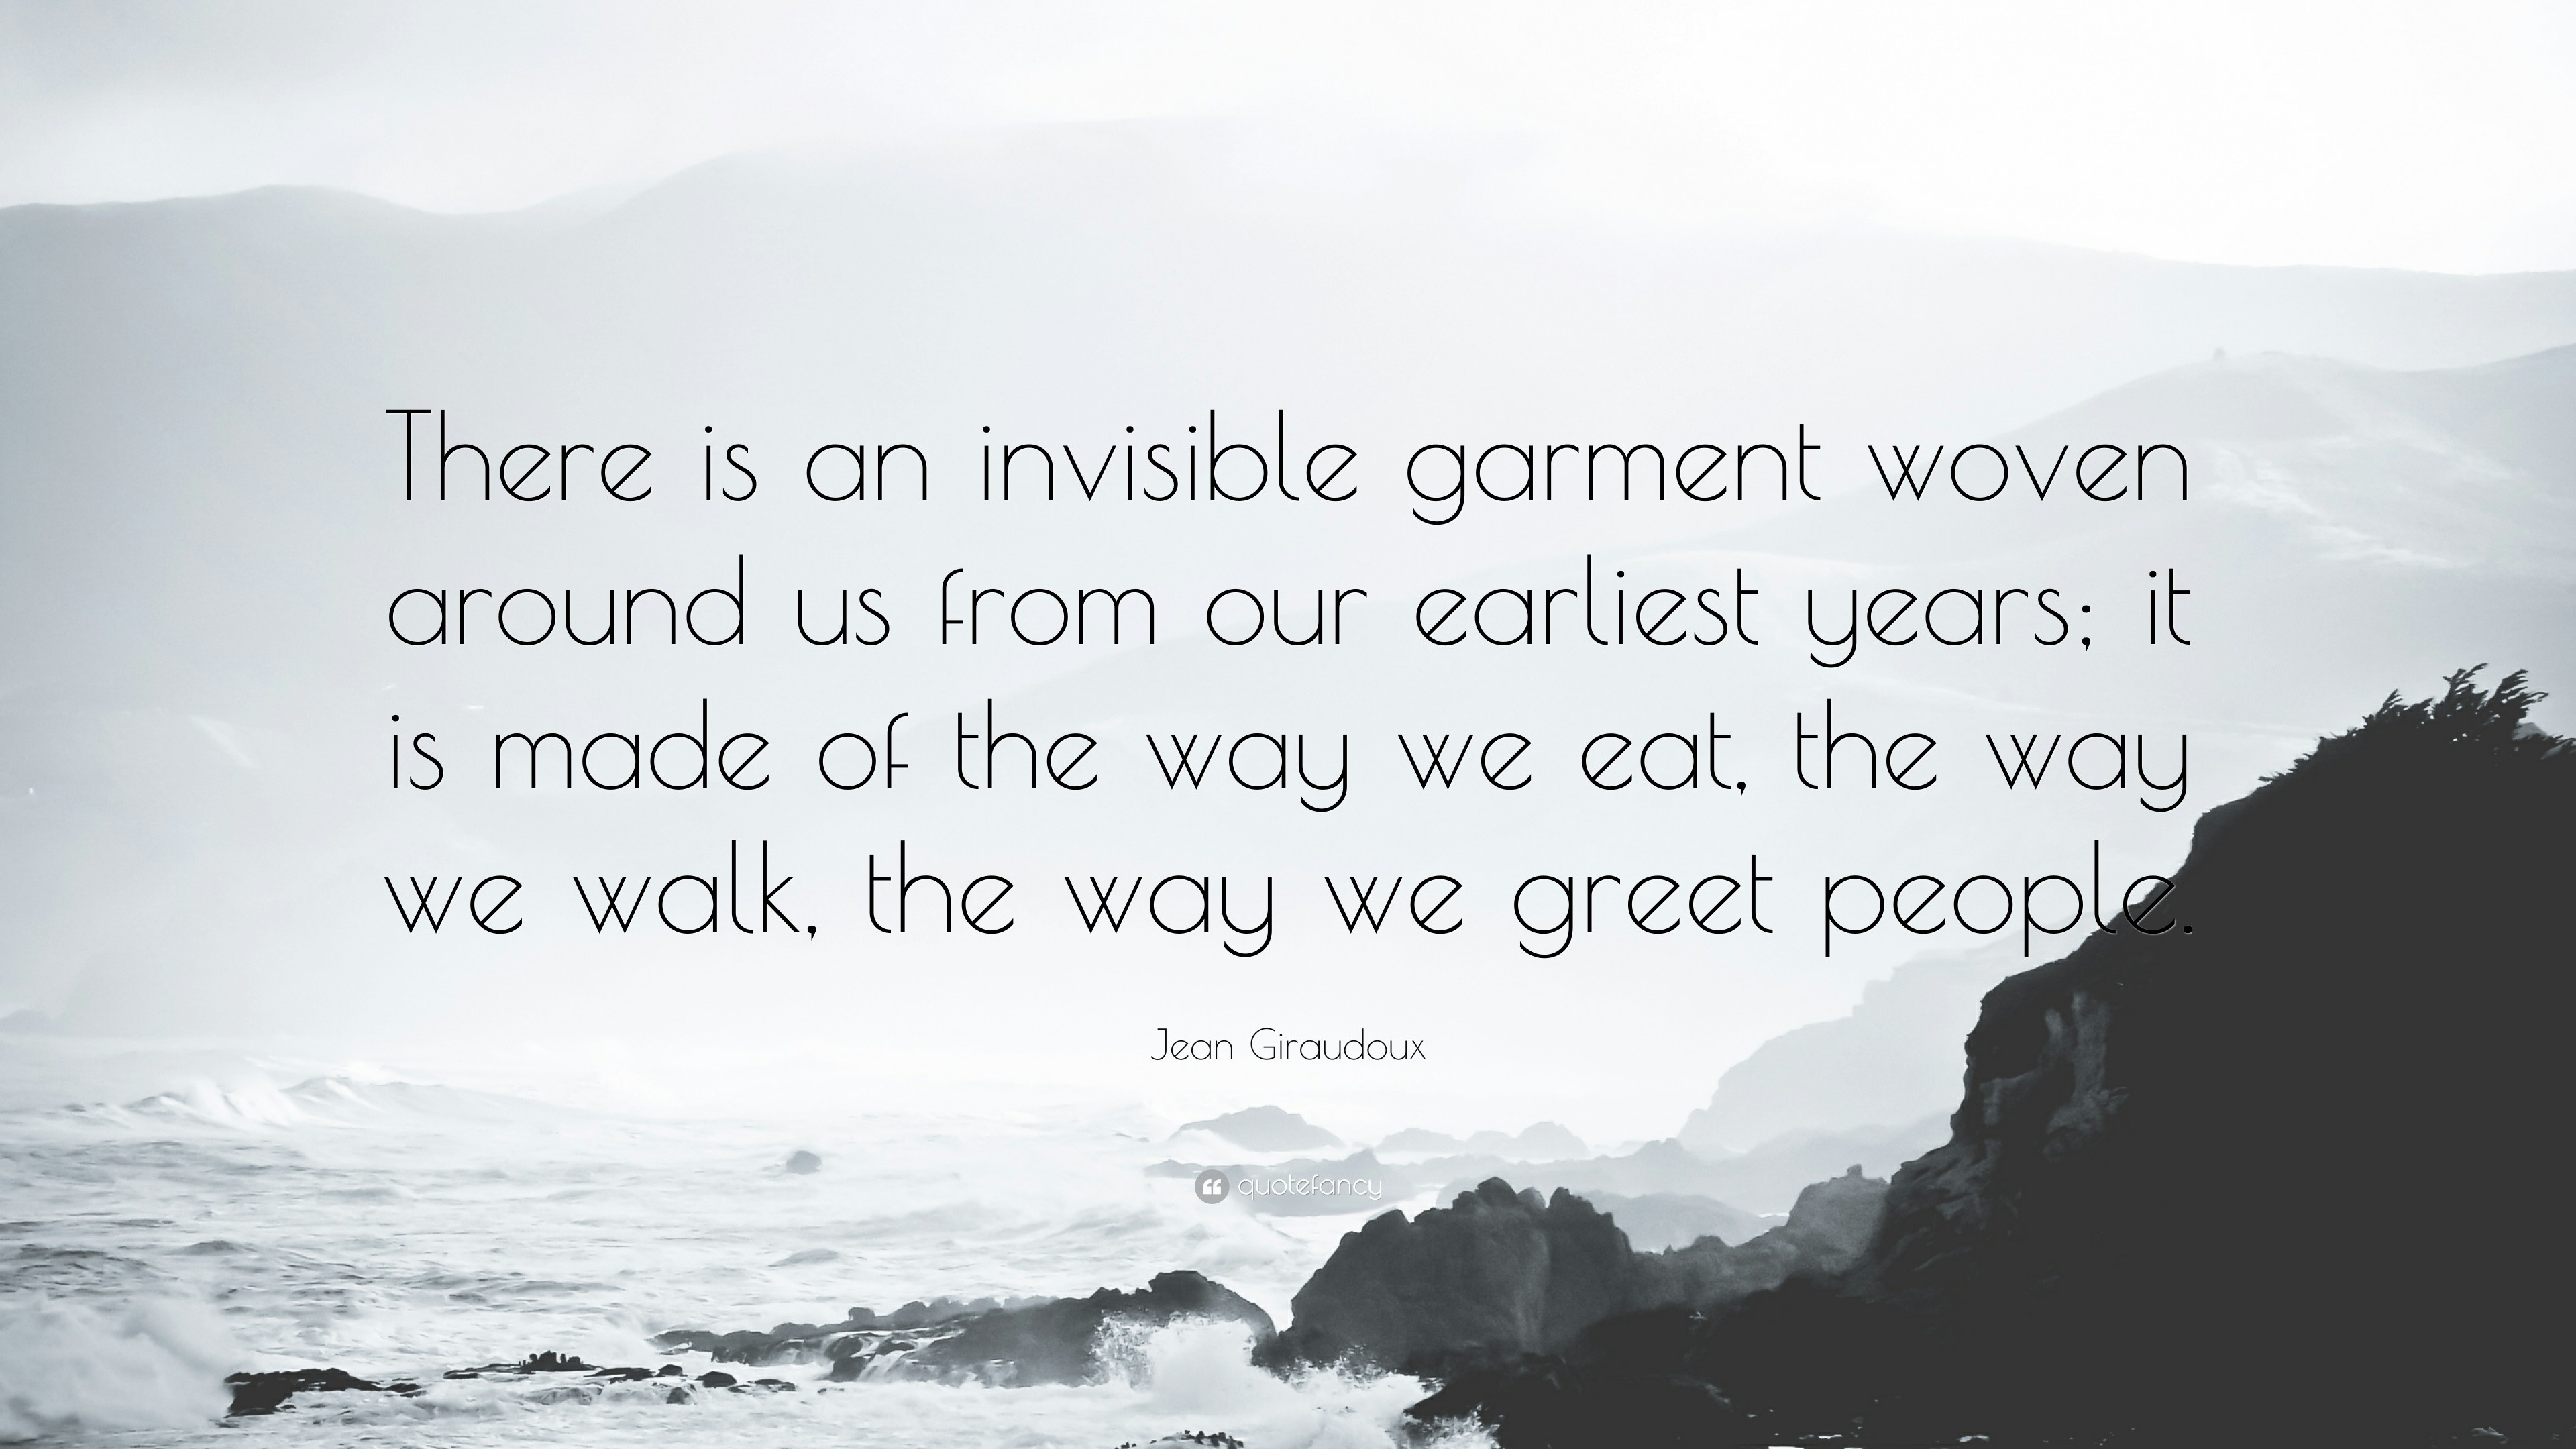 https://quotefancy.com/media/wallpaper/3840x2160/932472-Jean-Giraudoux-Quote-There-is-an-invisible-garment-woven-around-us.jpg